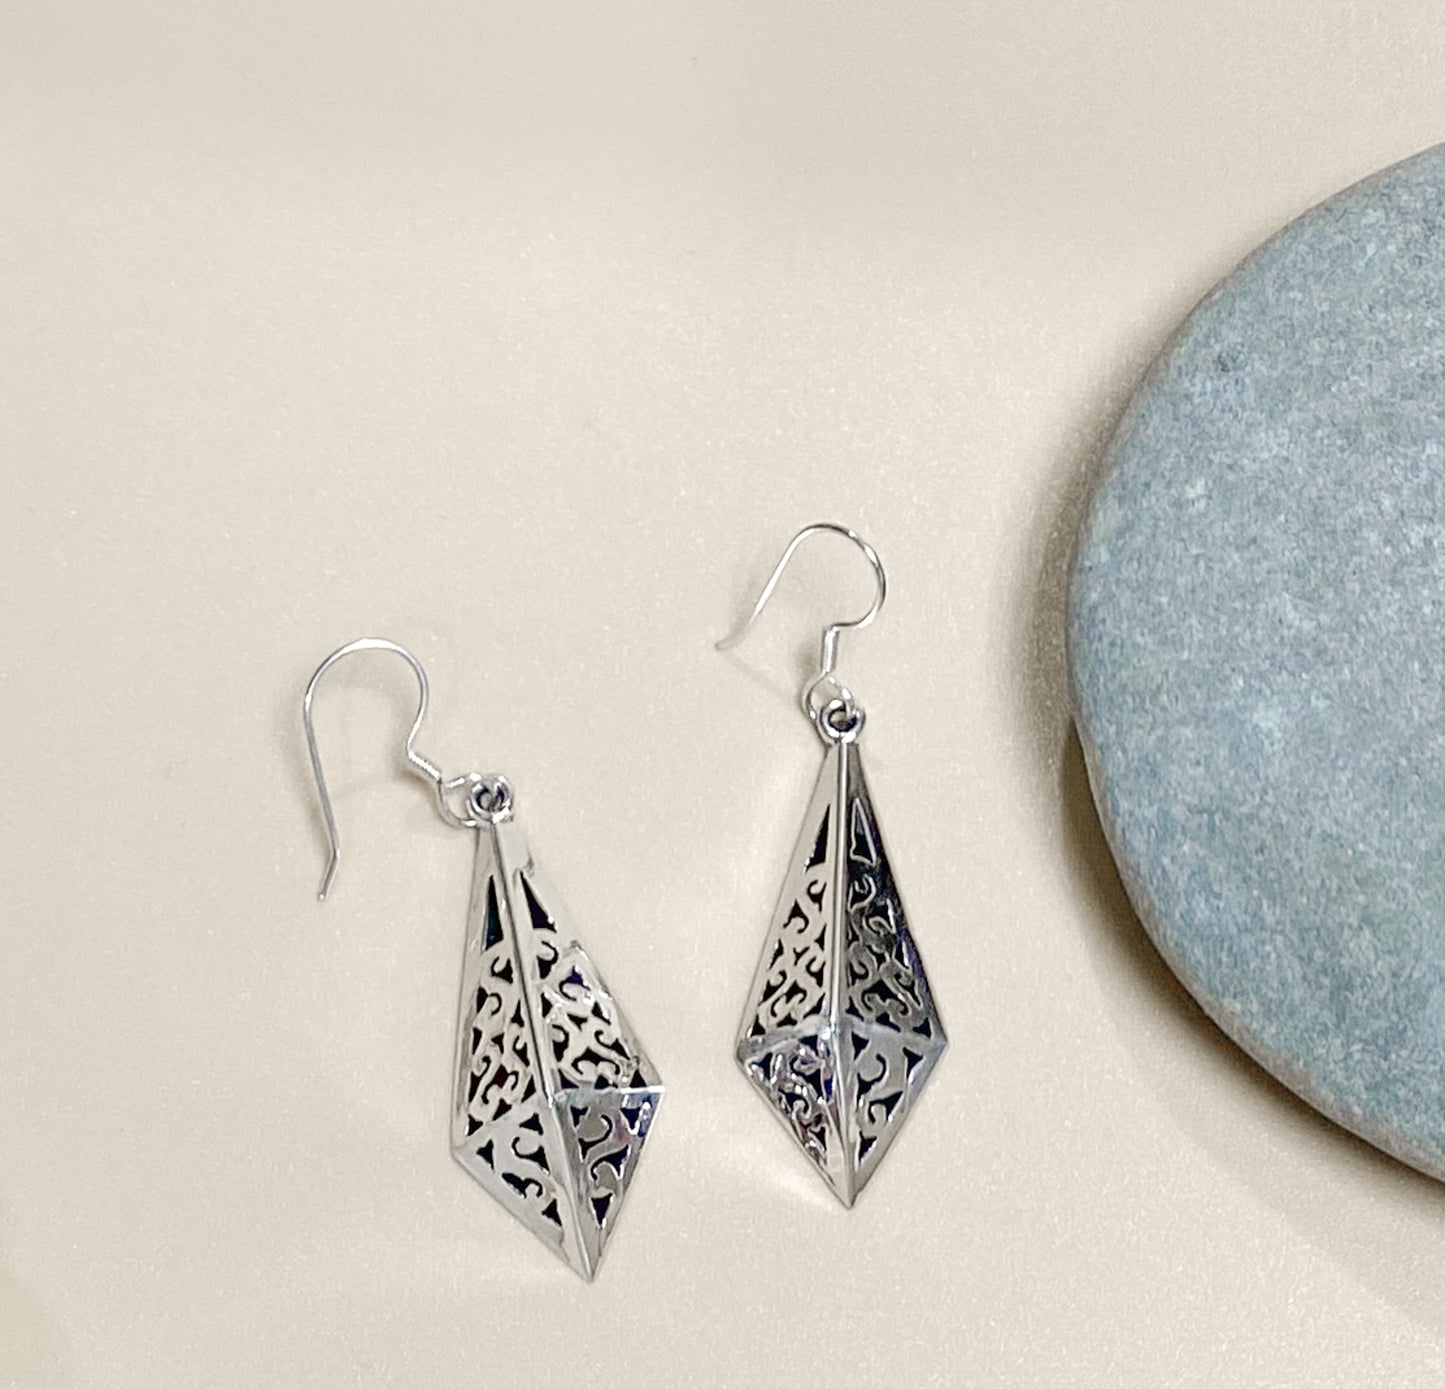 Via Taxco Sterling Silver Handmade Earring With Amazing Detail